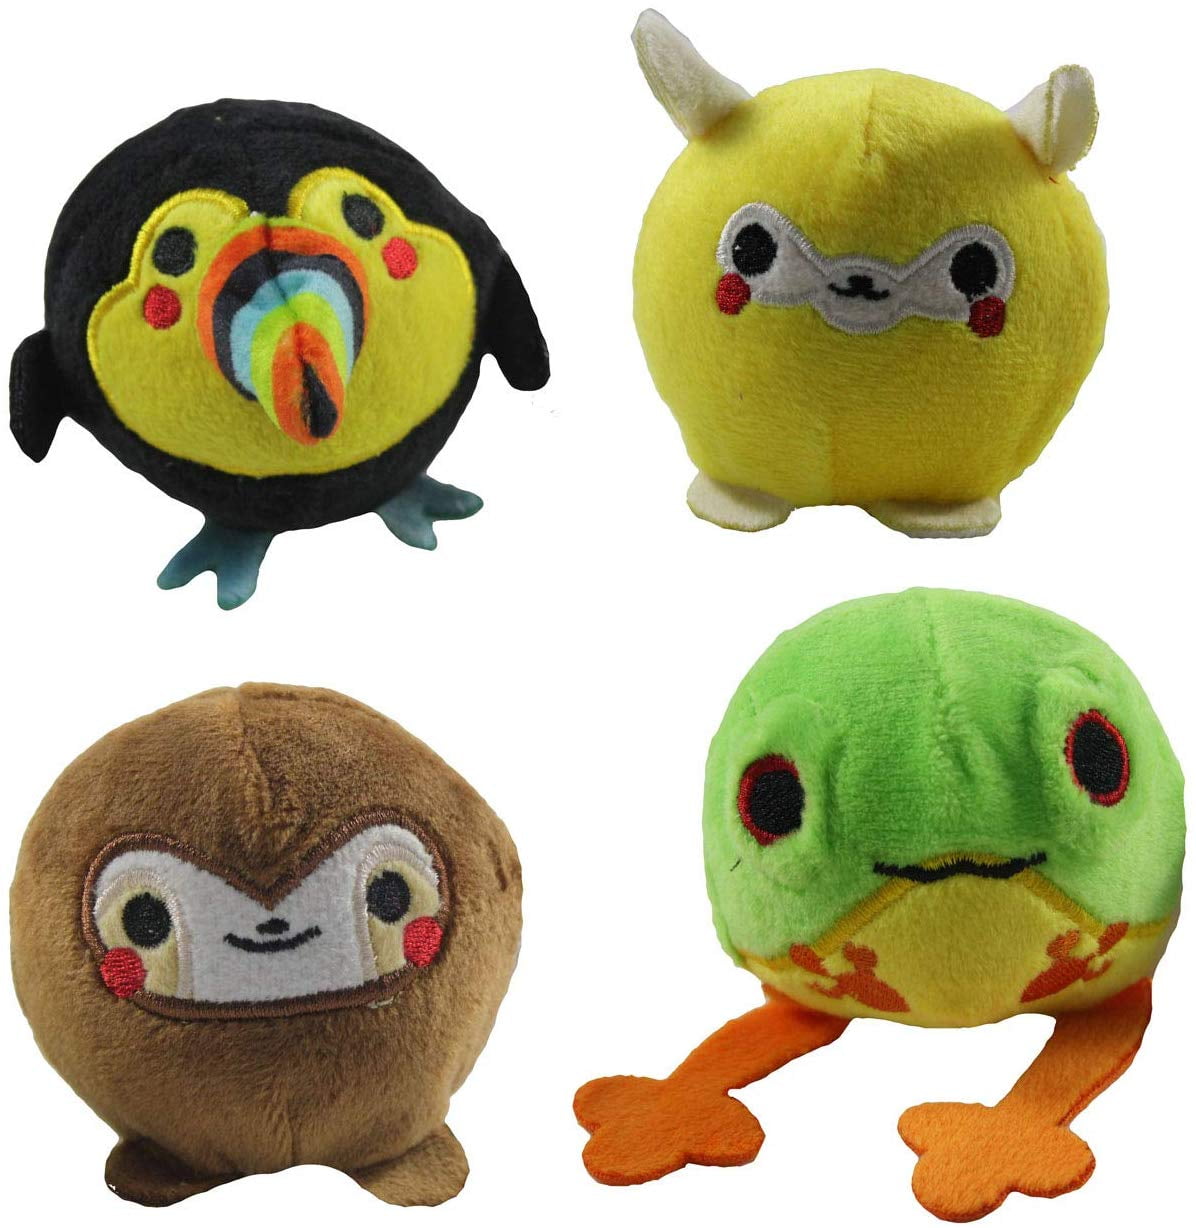 Details about   3" Squish Plush Animal Stuffed Toy for Sensory Stress Fidget Relief Gift Stuffer 